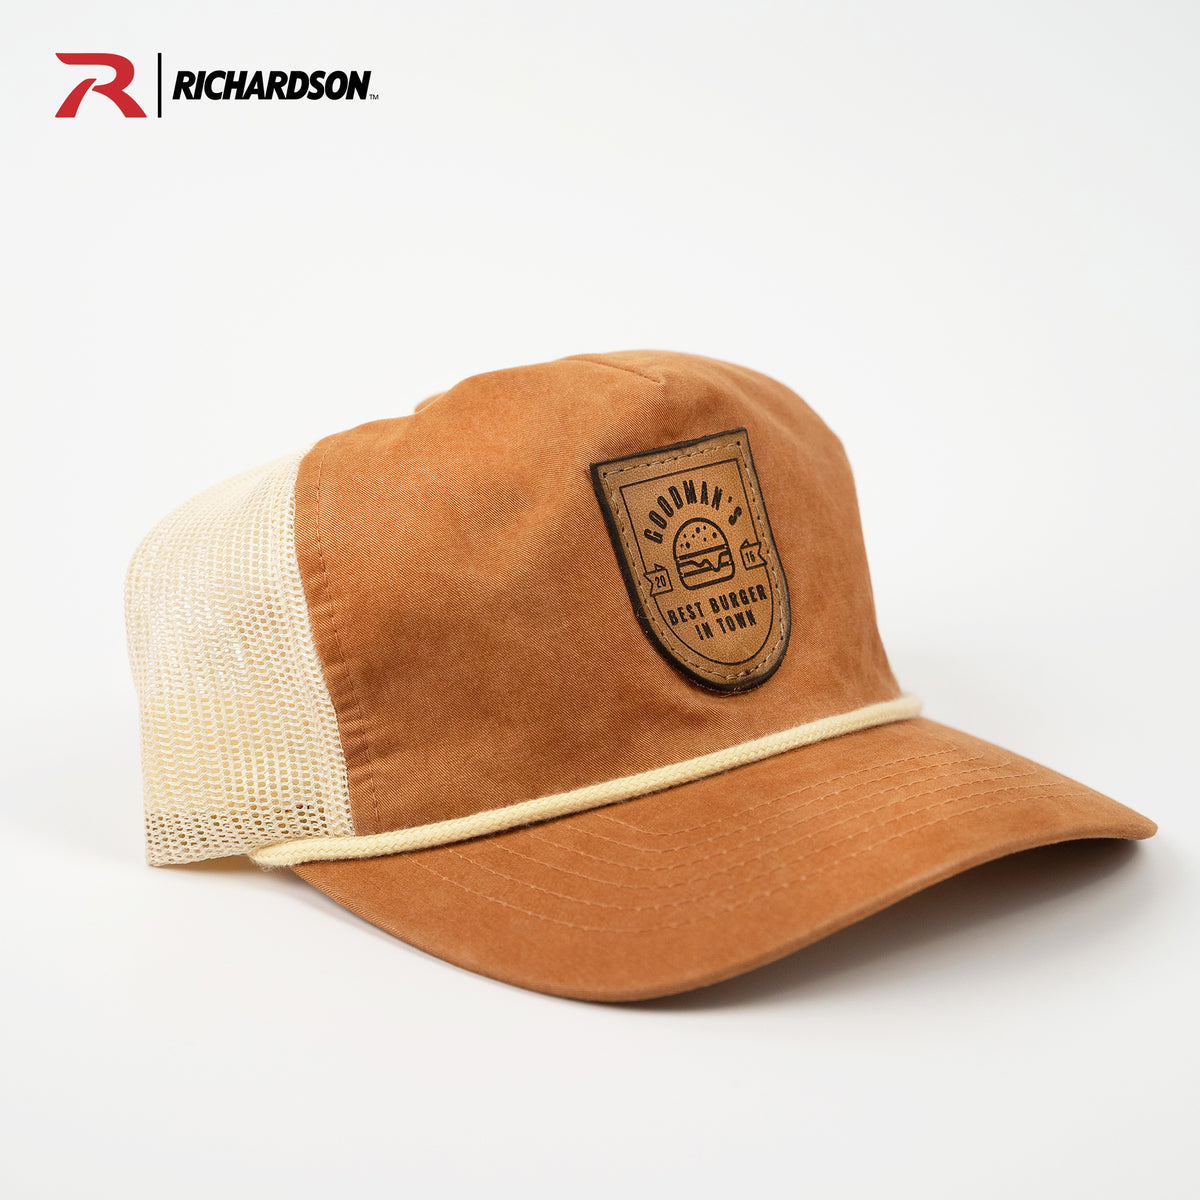 Orange Richardson 939 unstructured snapback rope hat with customized leather patch from Holtz Leather Co in Huntsville, Alabama